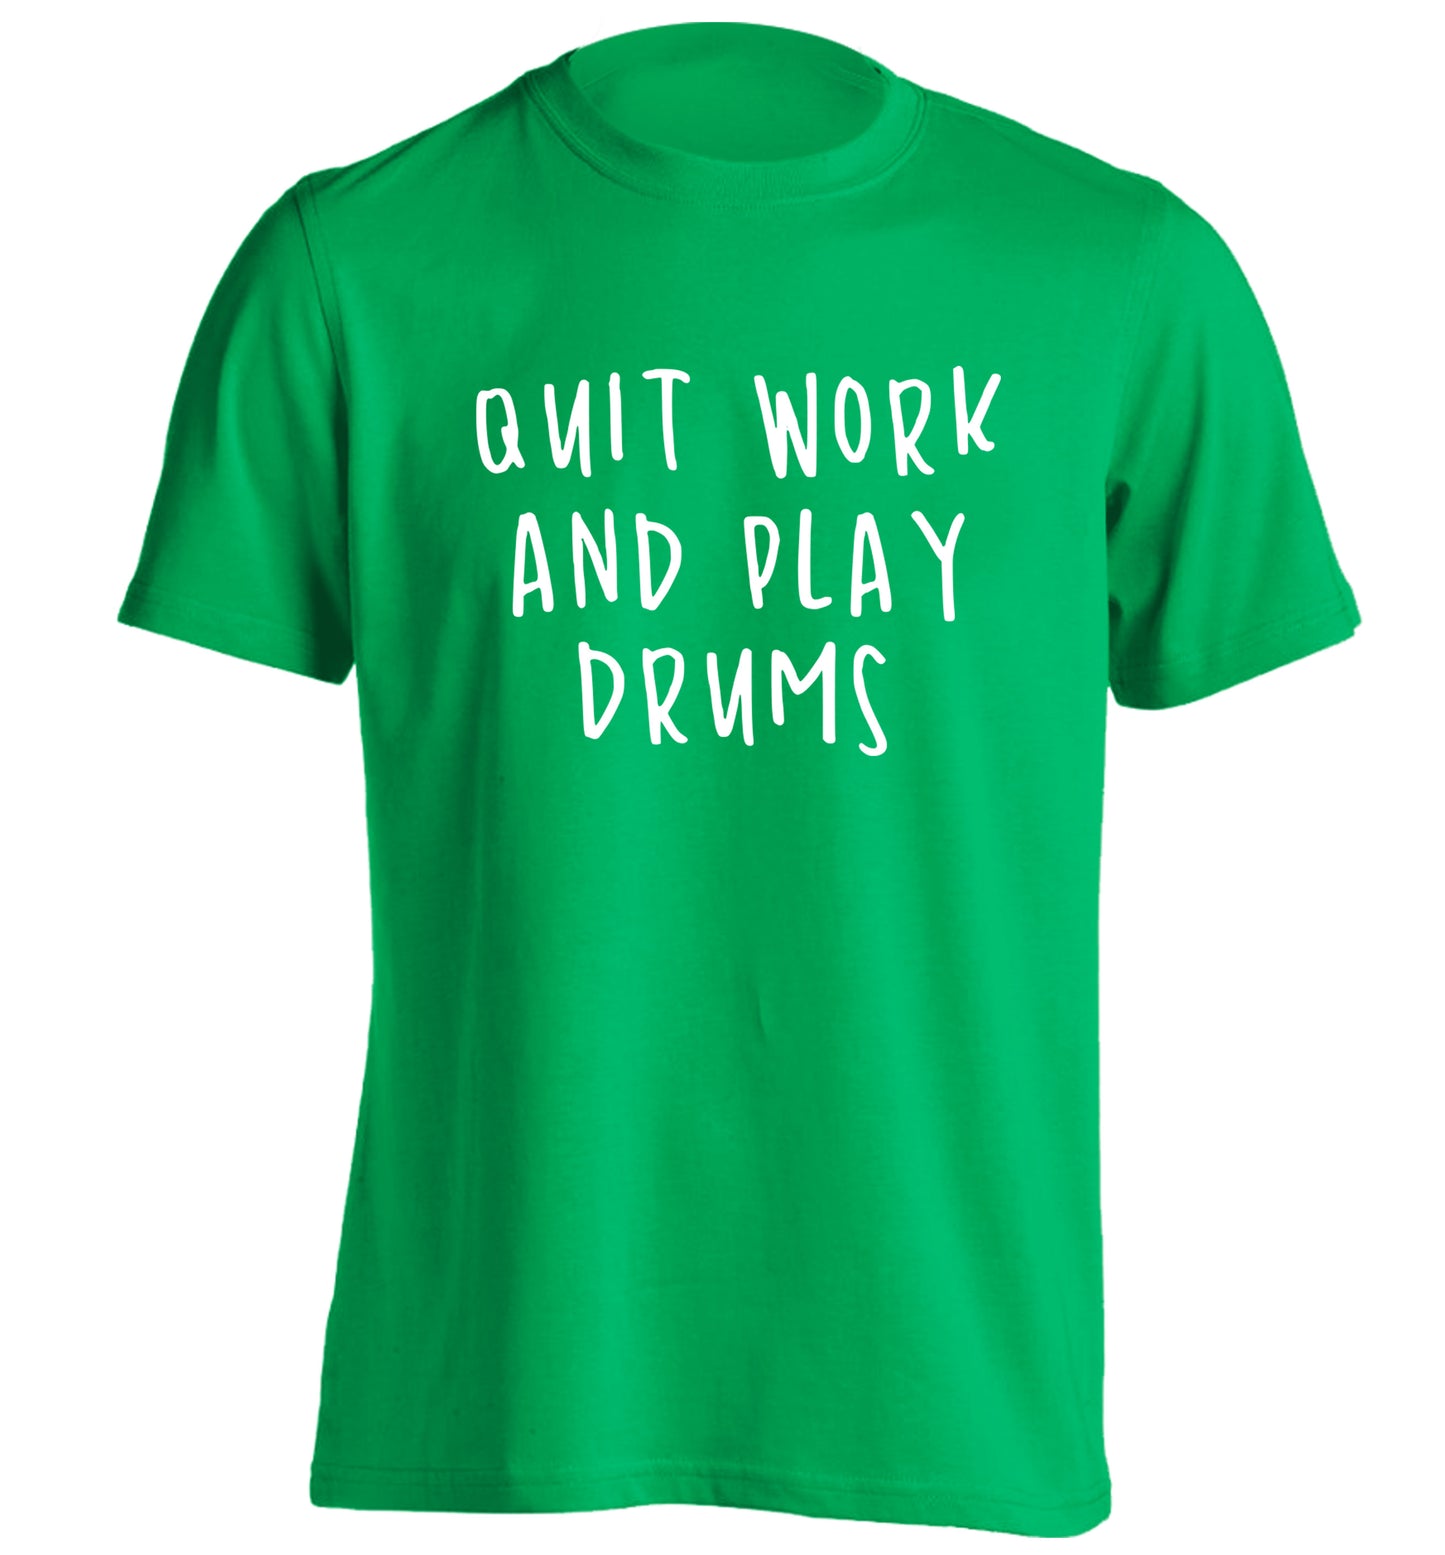 Quit work and play drums adults unisex green Tshirt 2XL